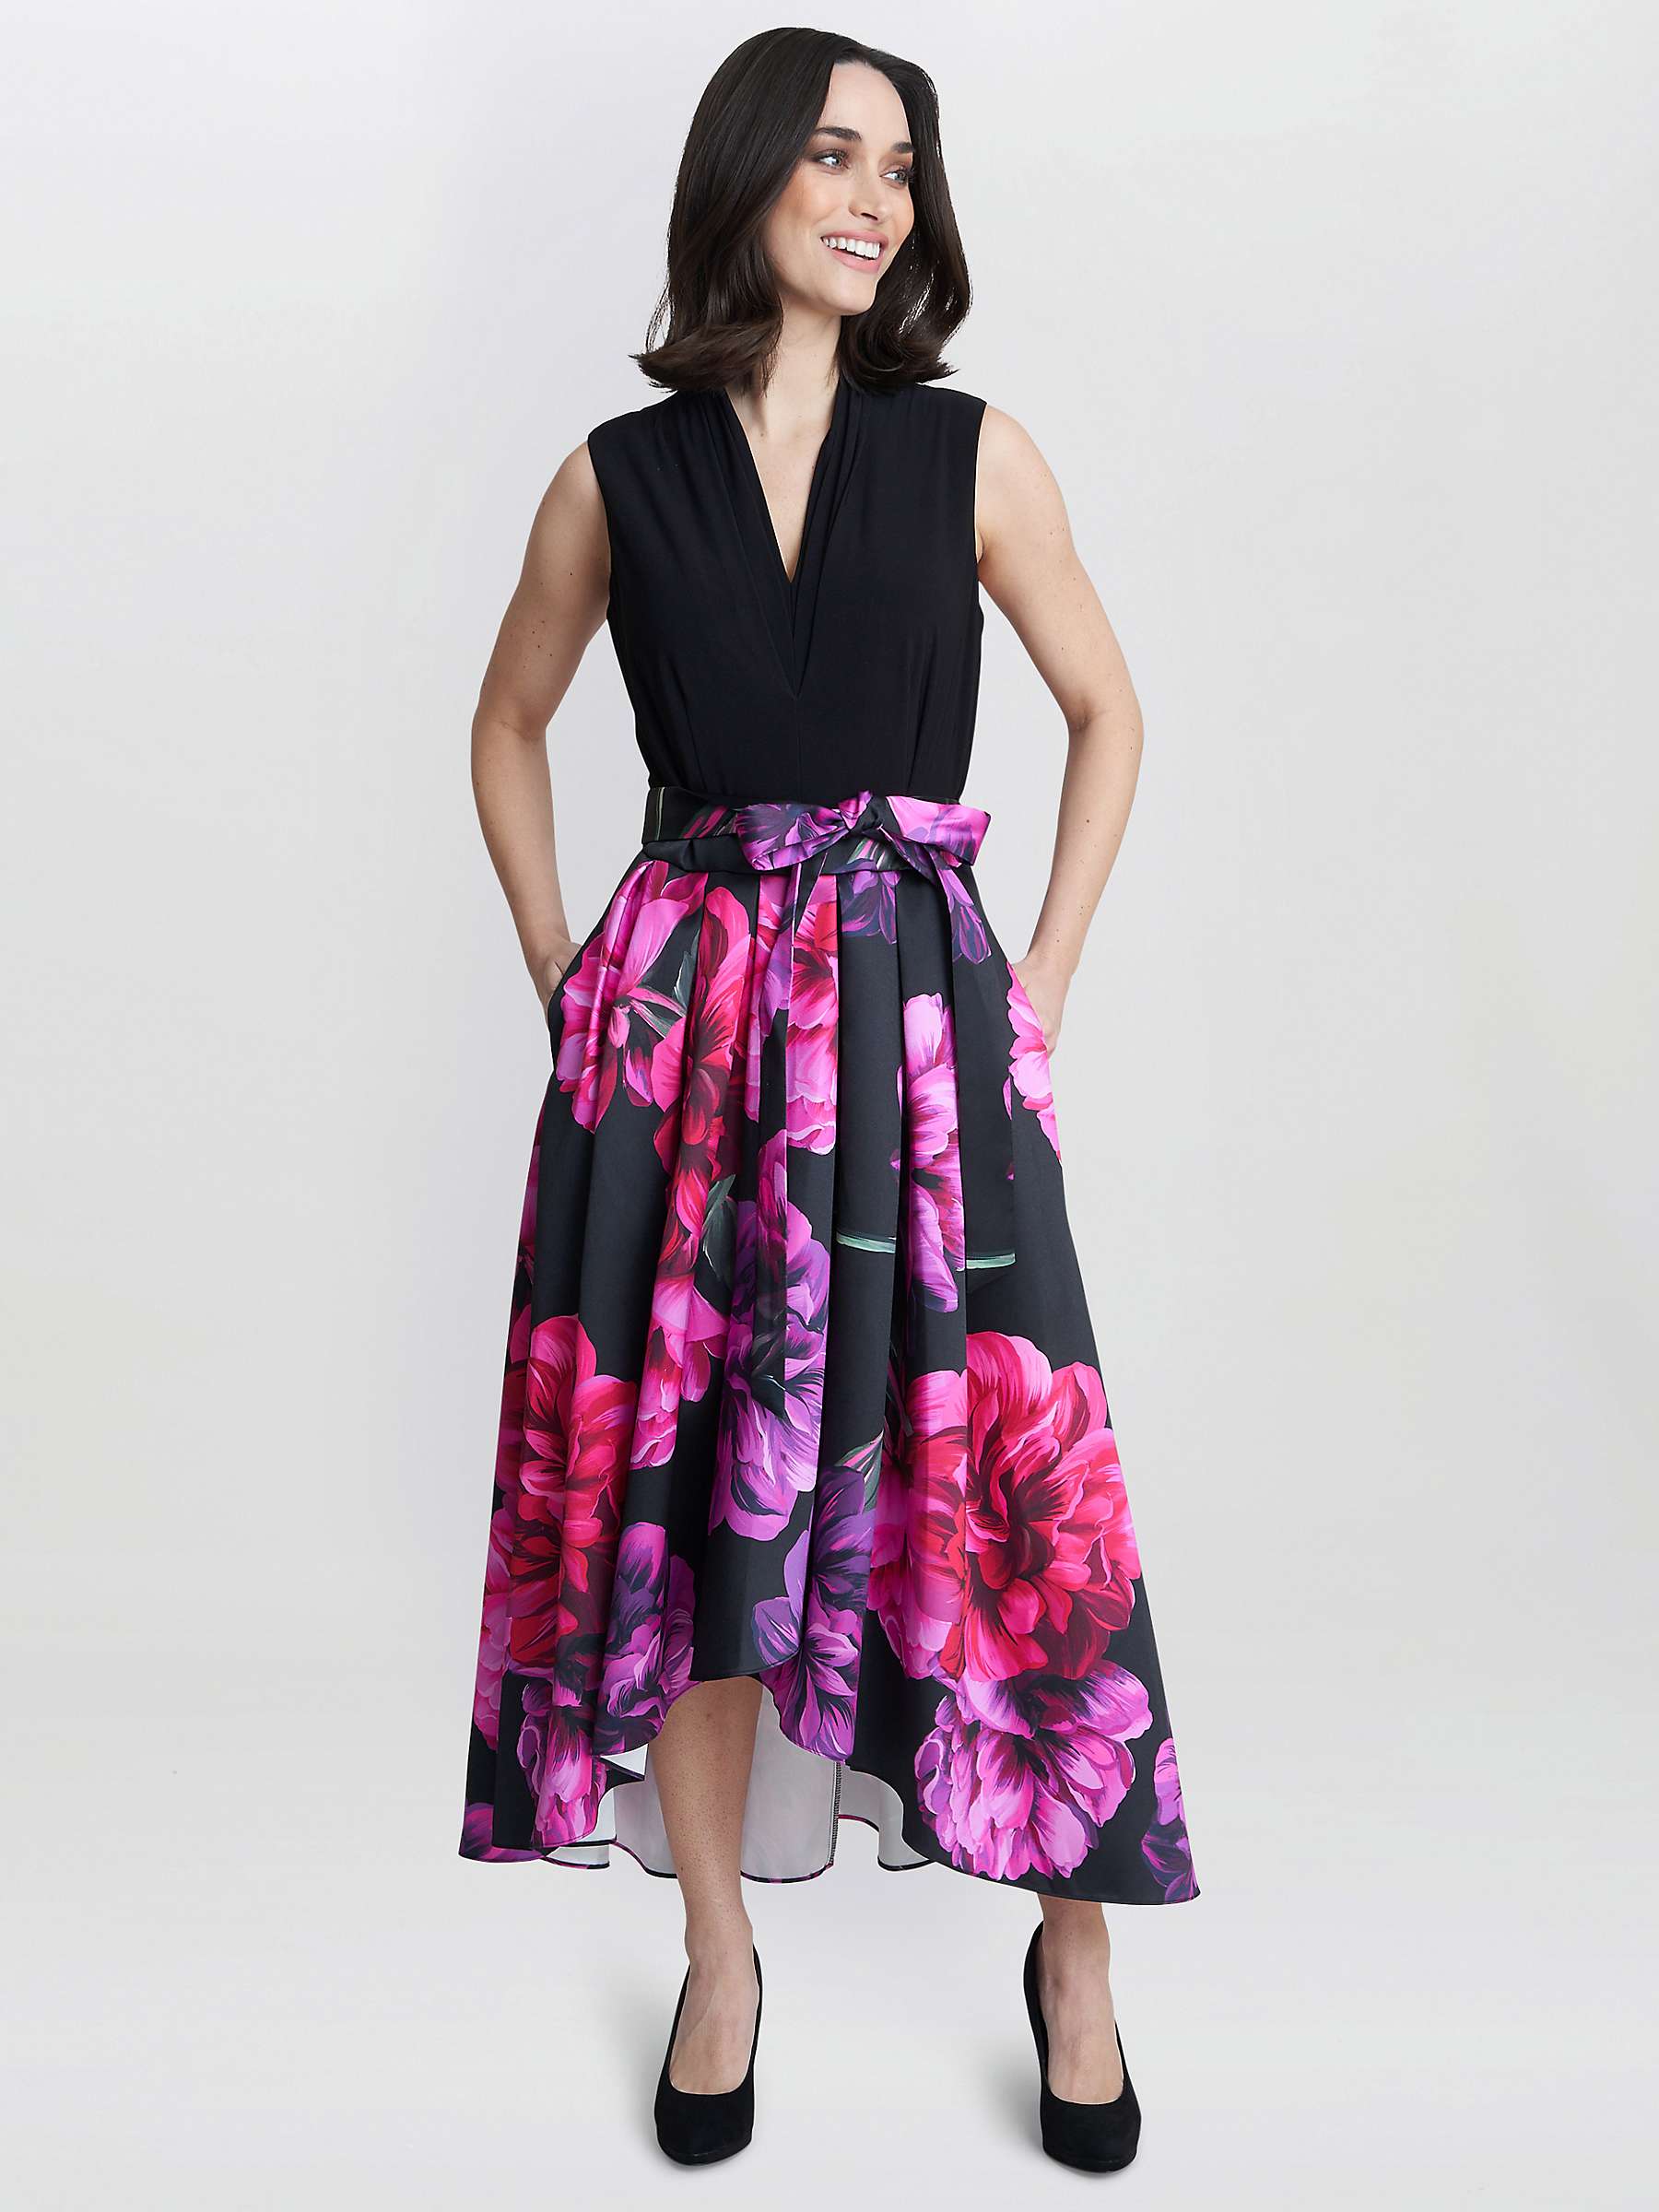 Buy Gina Bacconi  Annabelle Printed High Low Dress, Black/Multi Online at johnlewis.com